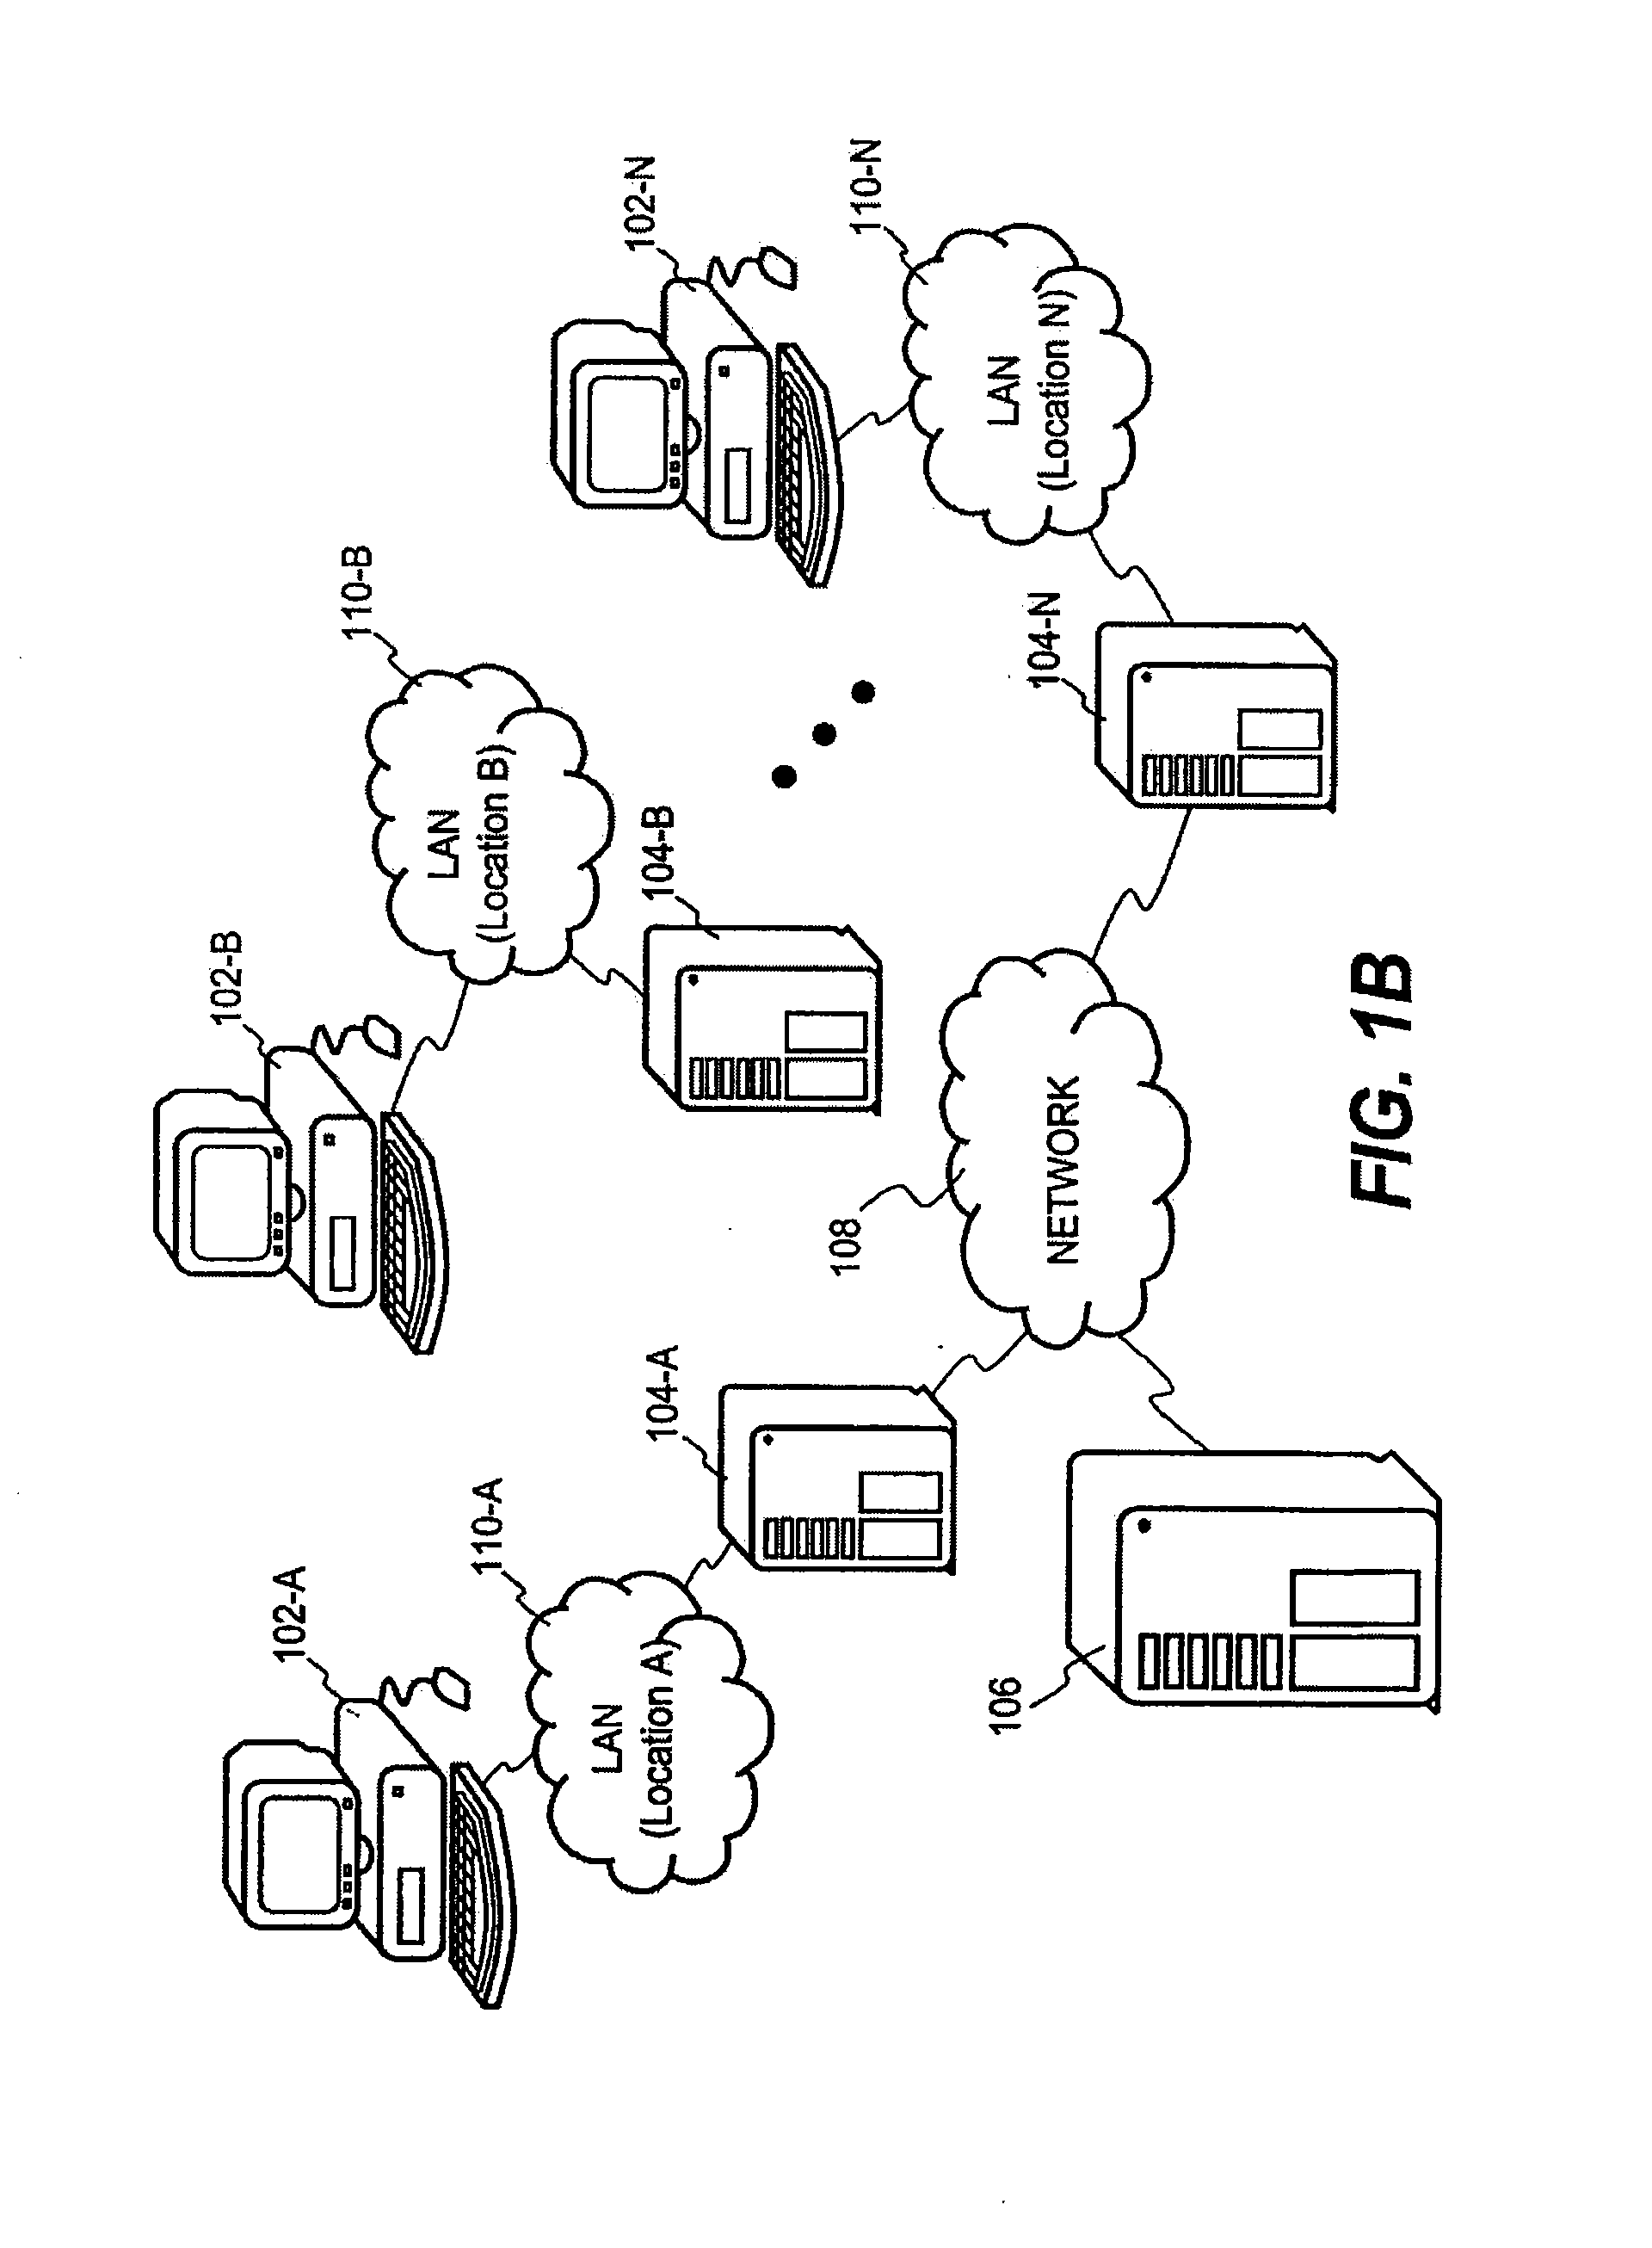 Method and System for Implementing Changes to Security Policies in a Distributed Security System